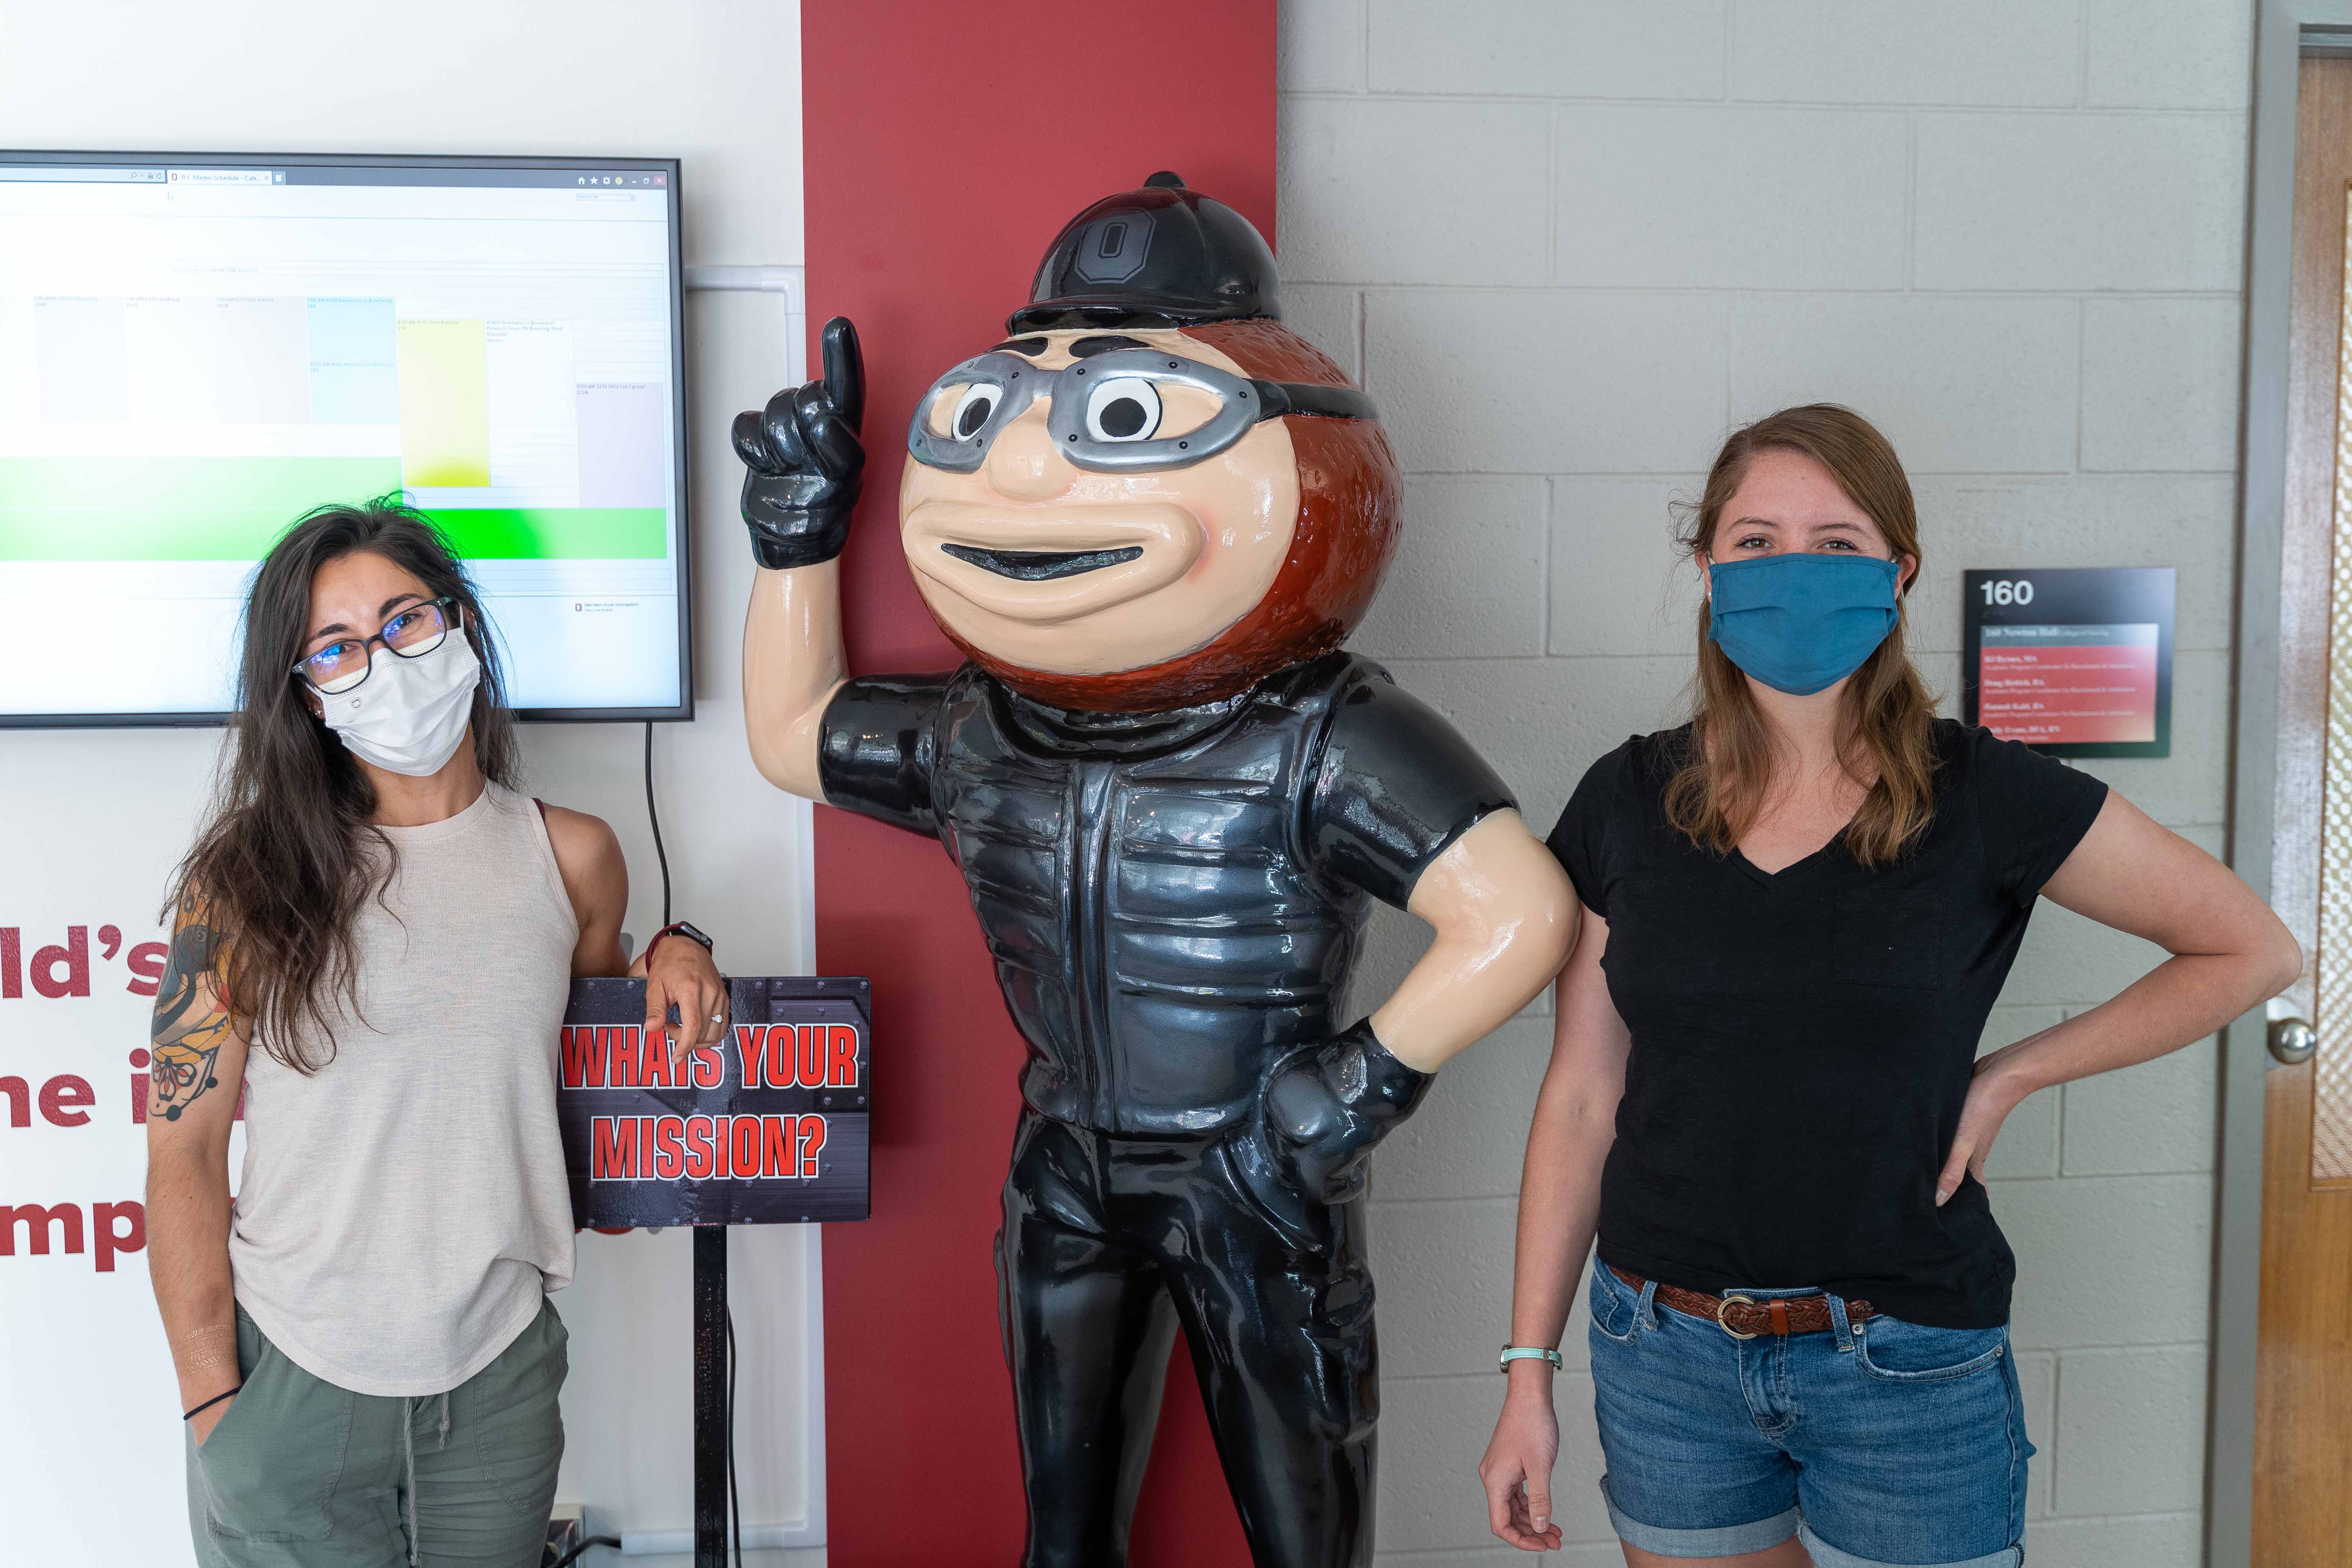 Alyssa Wenger and Amy Dennis posing with Mission Impossible Brutus